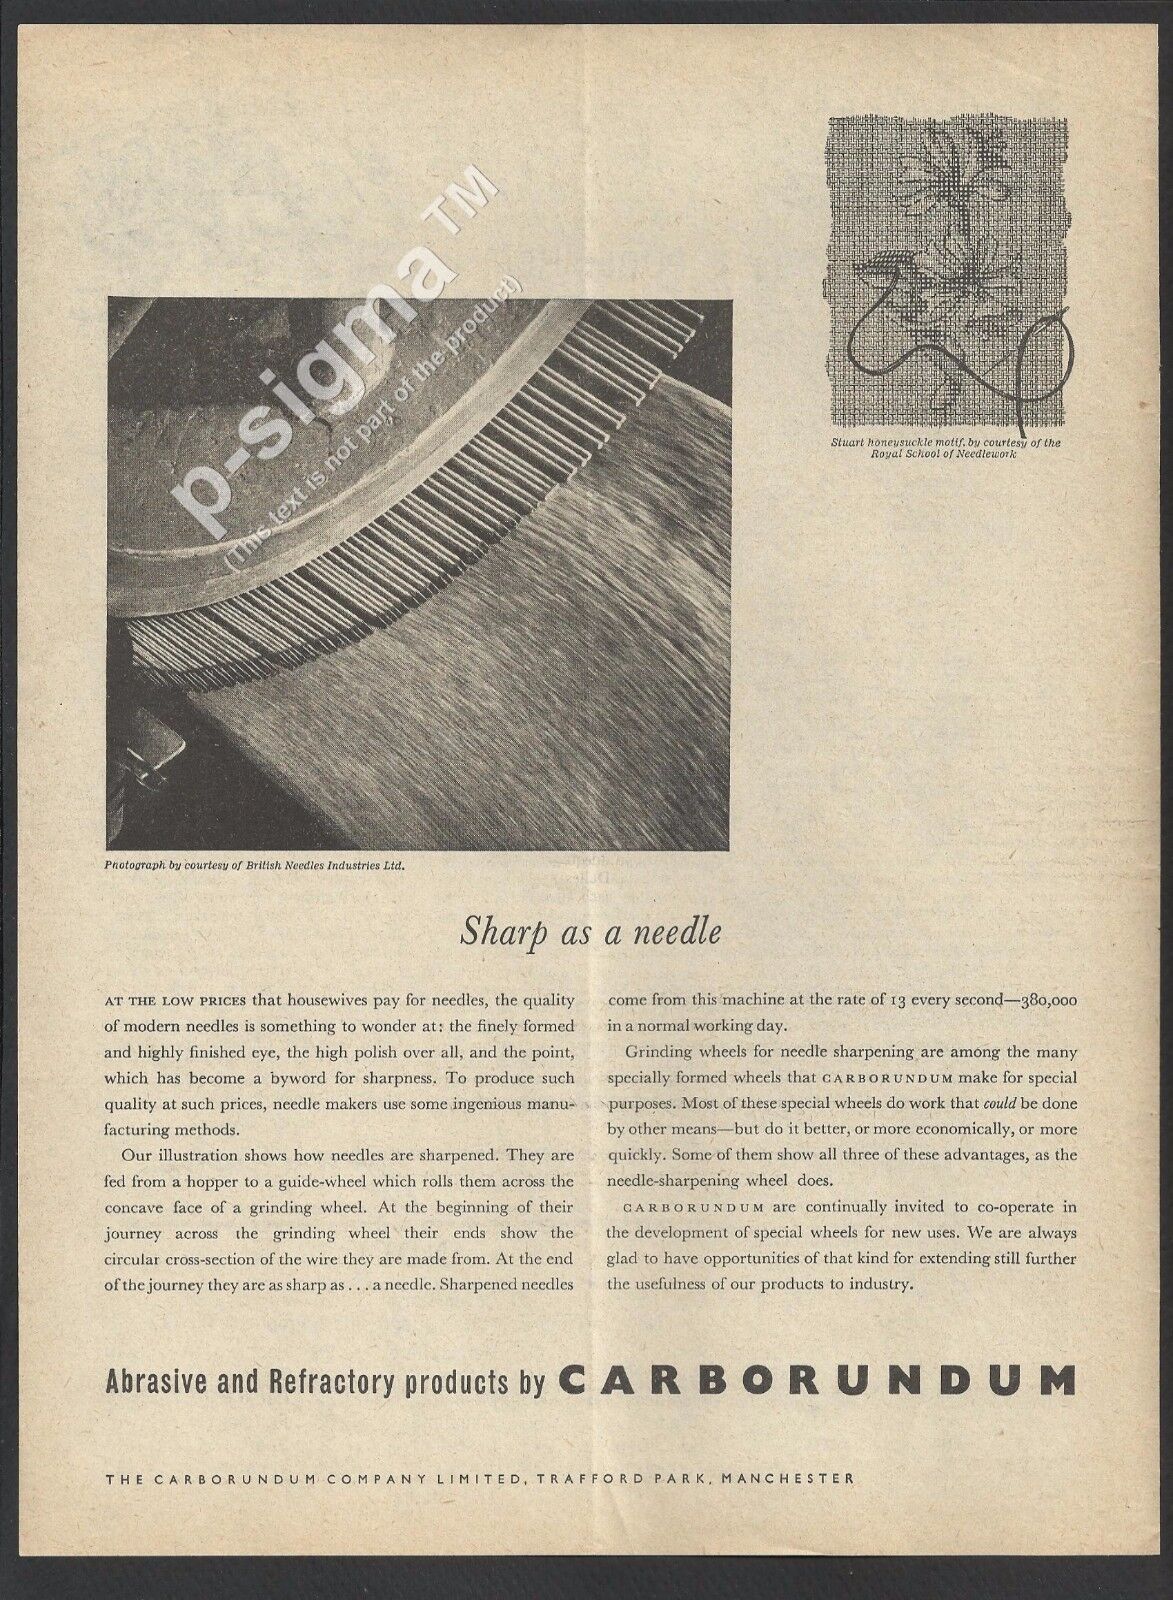 CARBORUNDUM Abrasive and Refractory products 1955 Vintage Print Ad